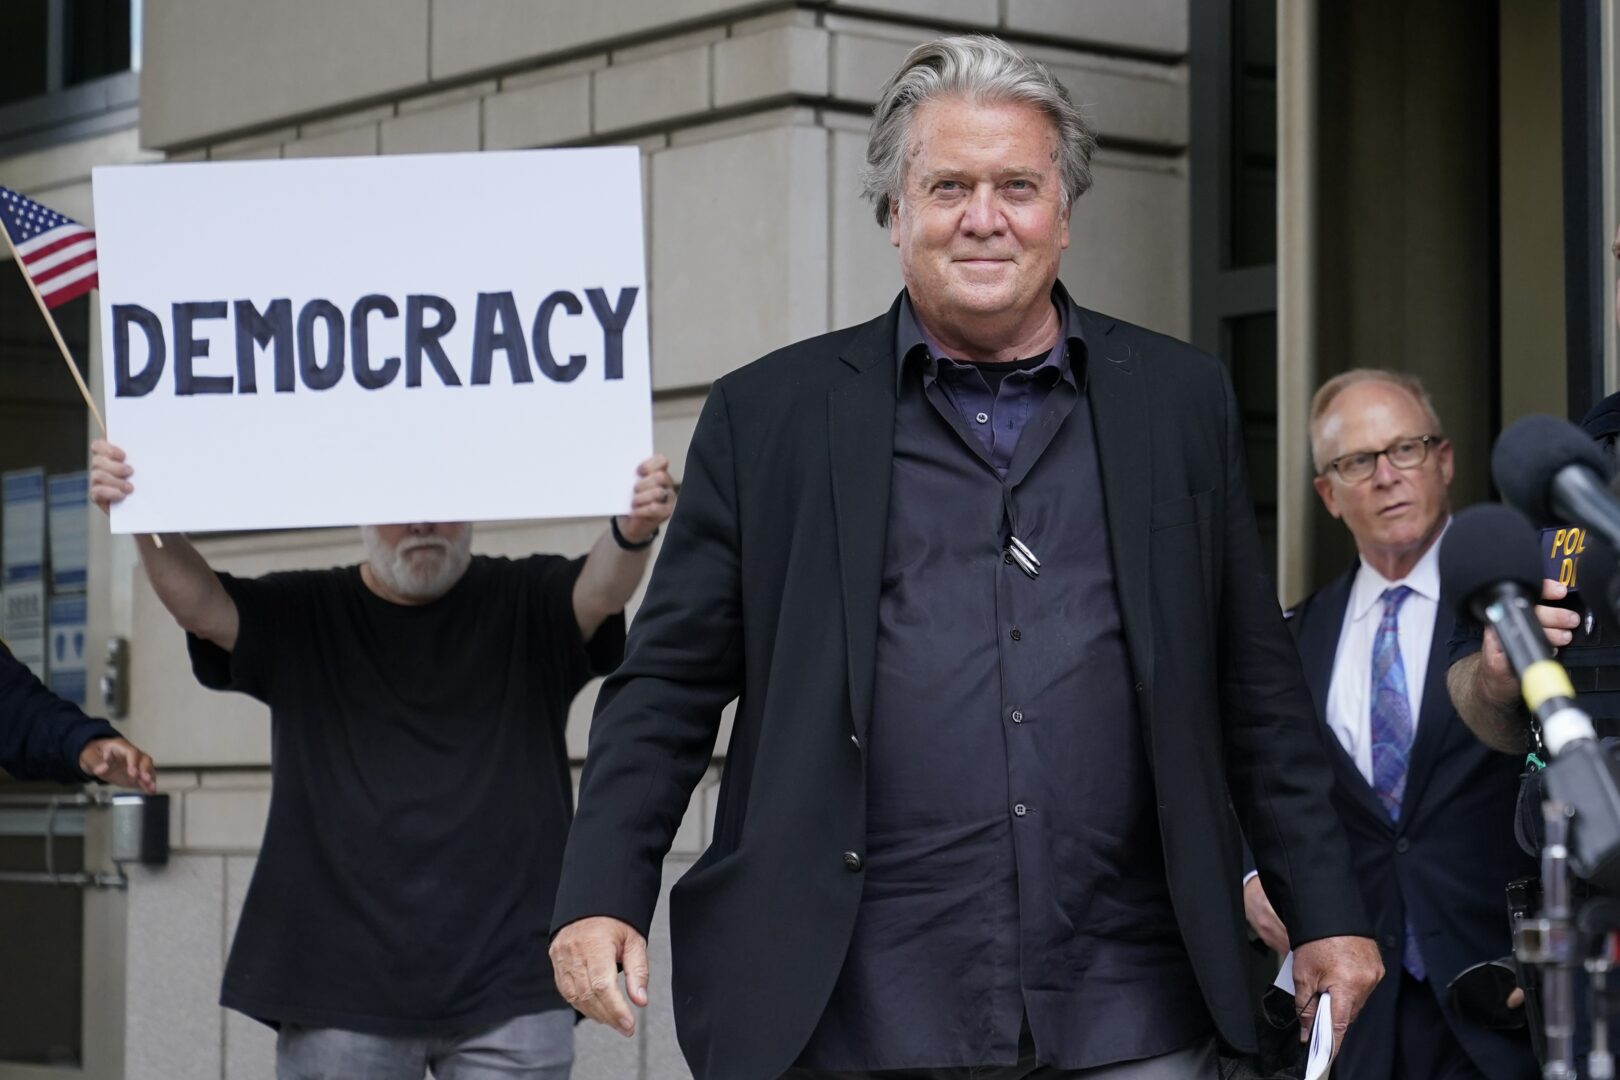 Former White House strategist Steve Bannon departs the federal courthouse, Monday, July 18, 2022, in Washington. Jury selection began Monday in the trial of Bannon, a one-time adviser to former President Donald Trump, who faces criminal contempt of Congress charges after refusing for months to cooperate with the House committee investigating the Jan. 6, 2021, Capitol insurrection.